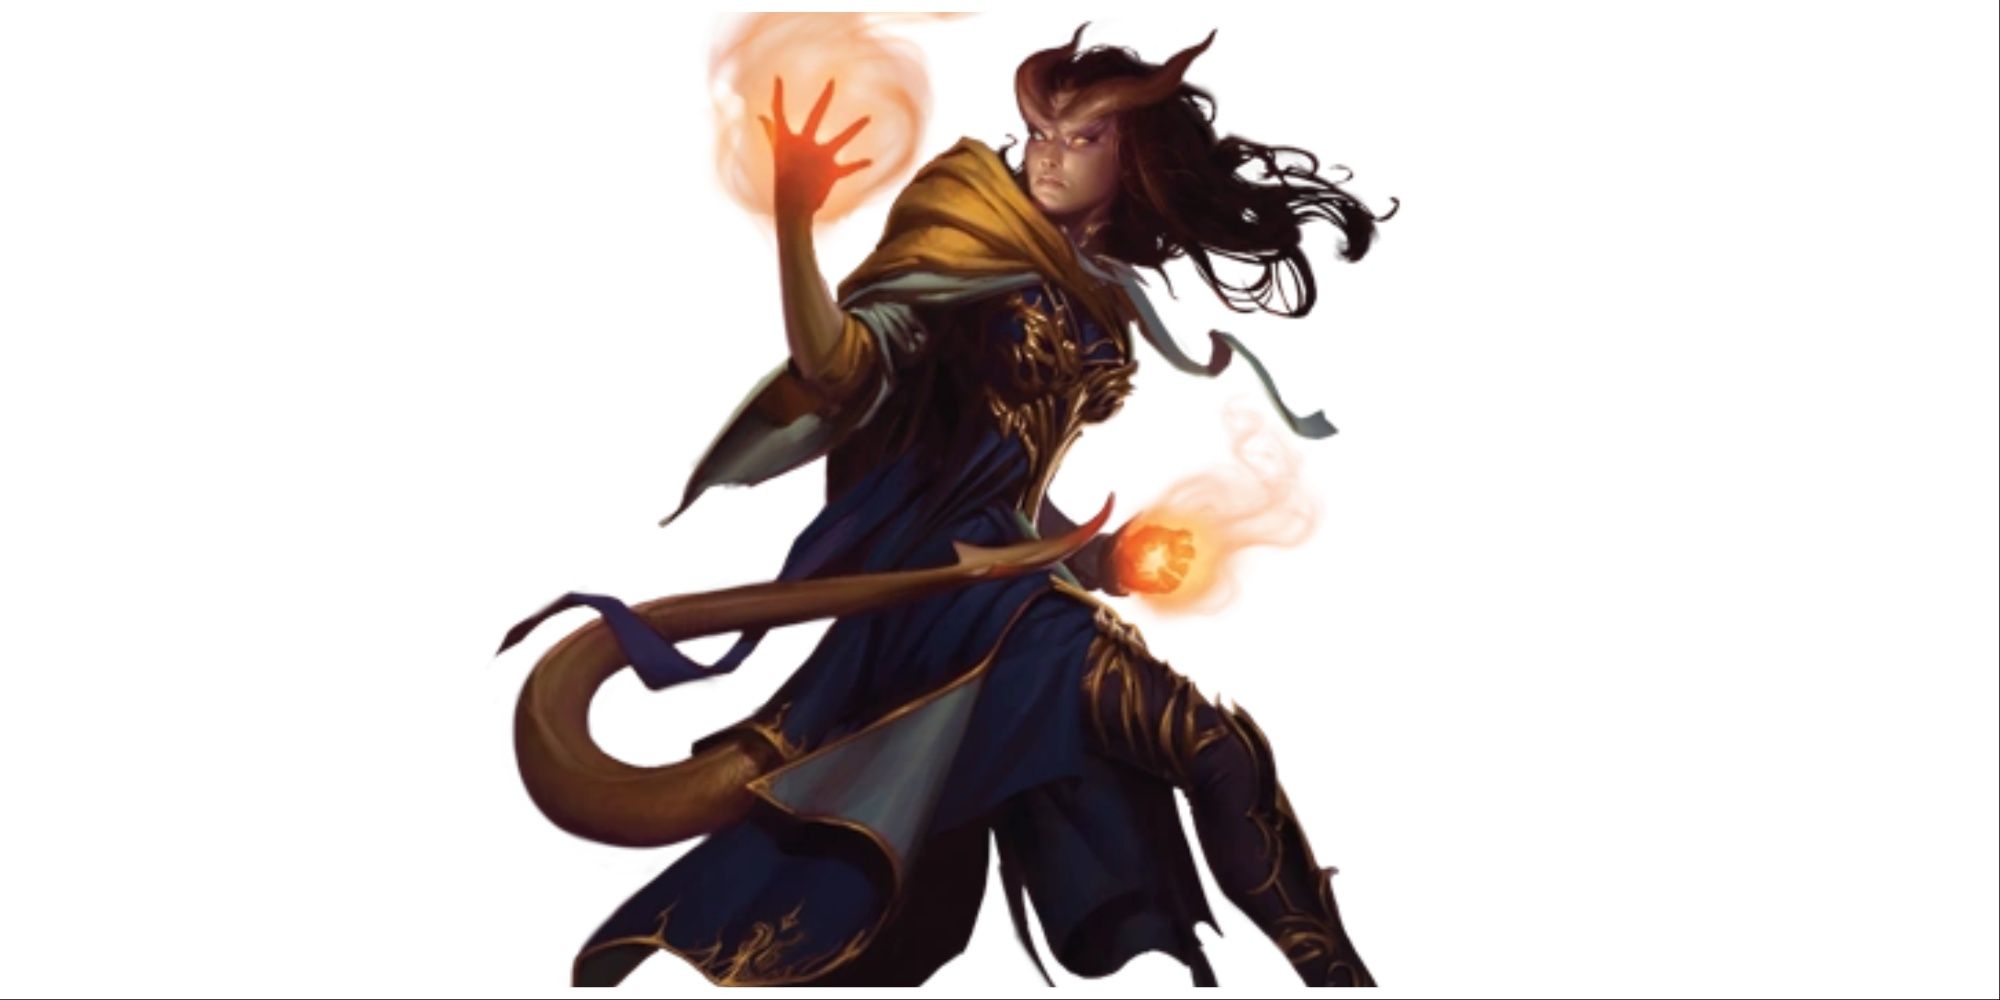 Warlock Tiefling using magical fire in Dungeons & Dragons